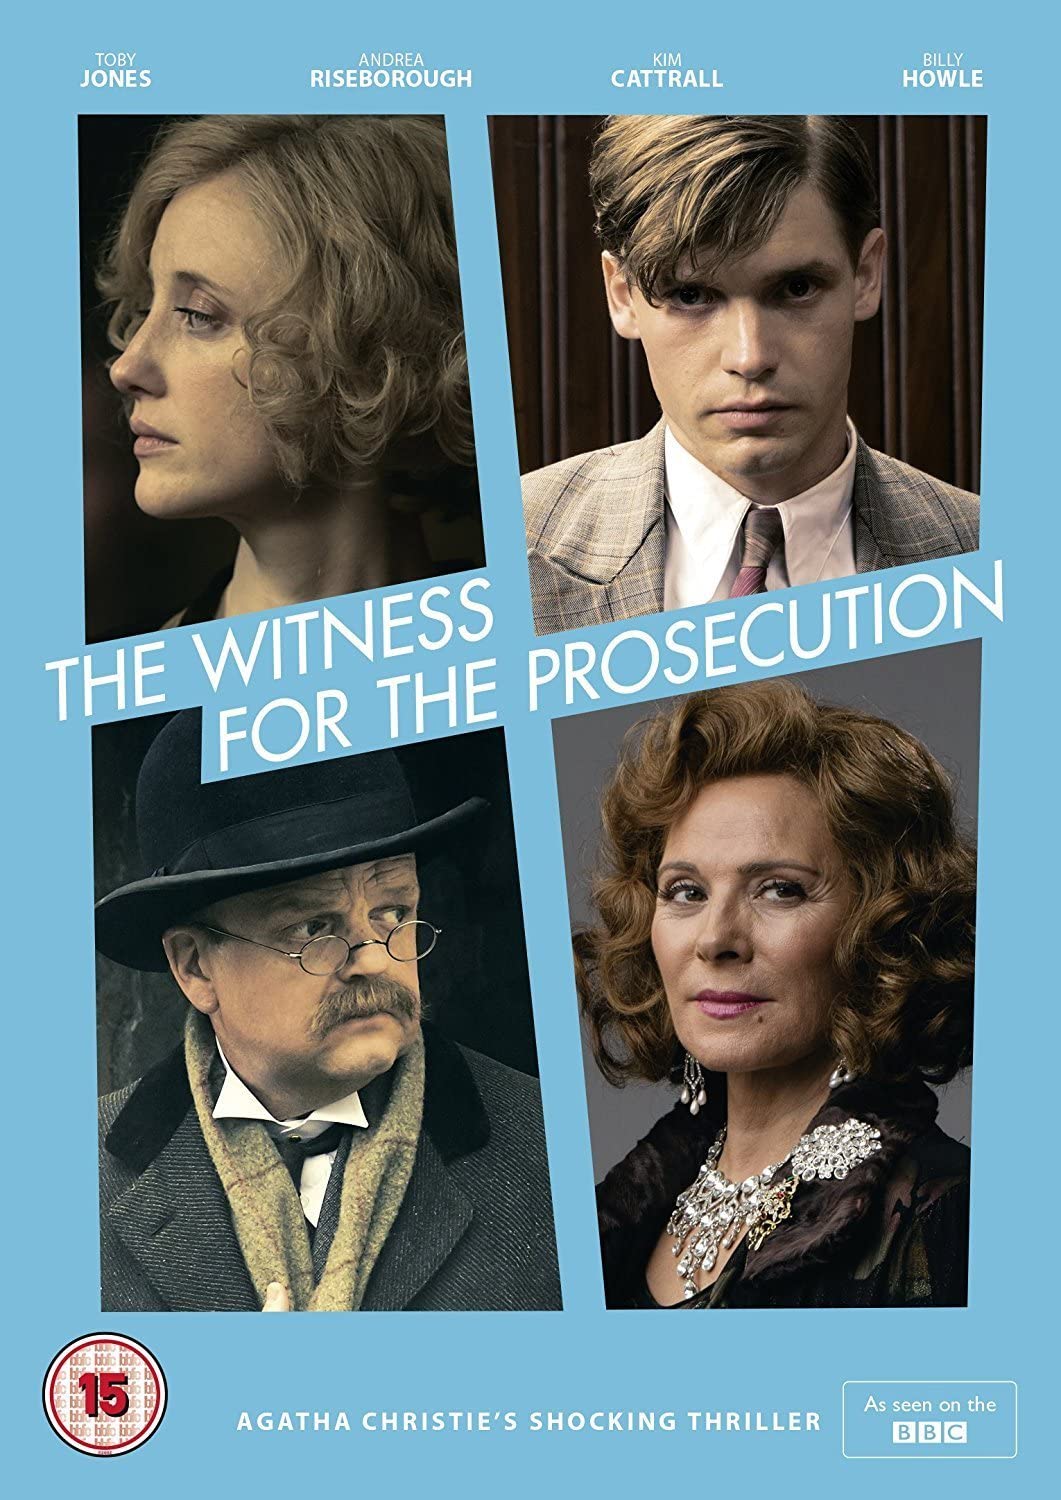 The Witness for the Prosecution - [DVD]